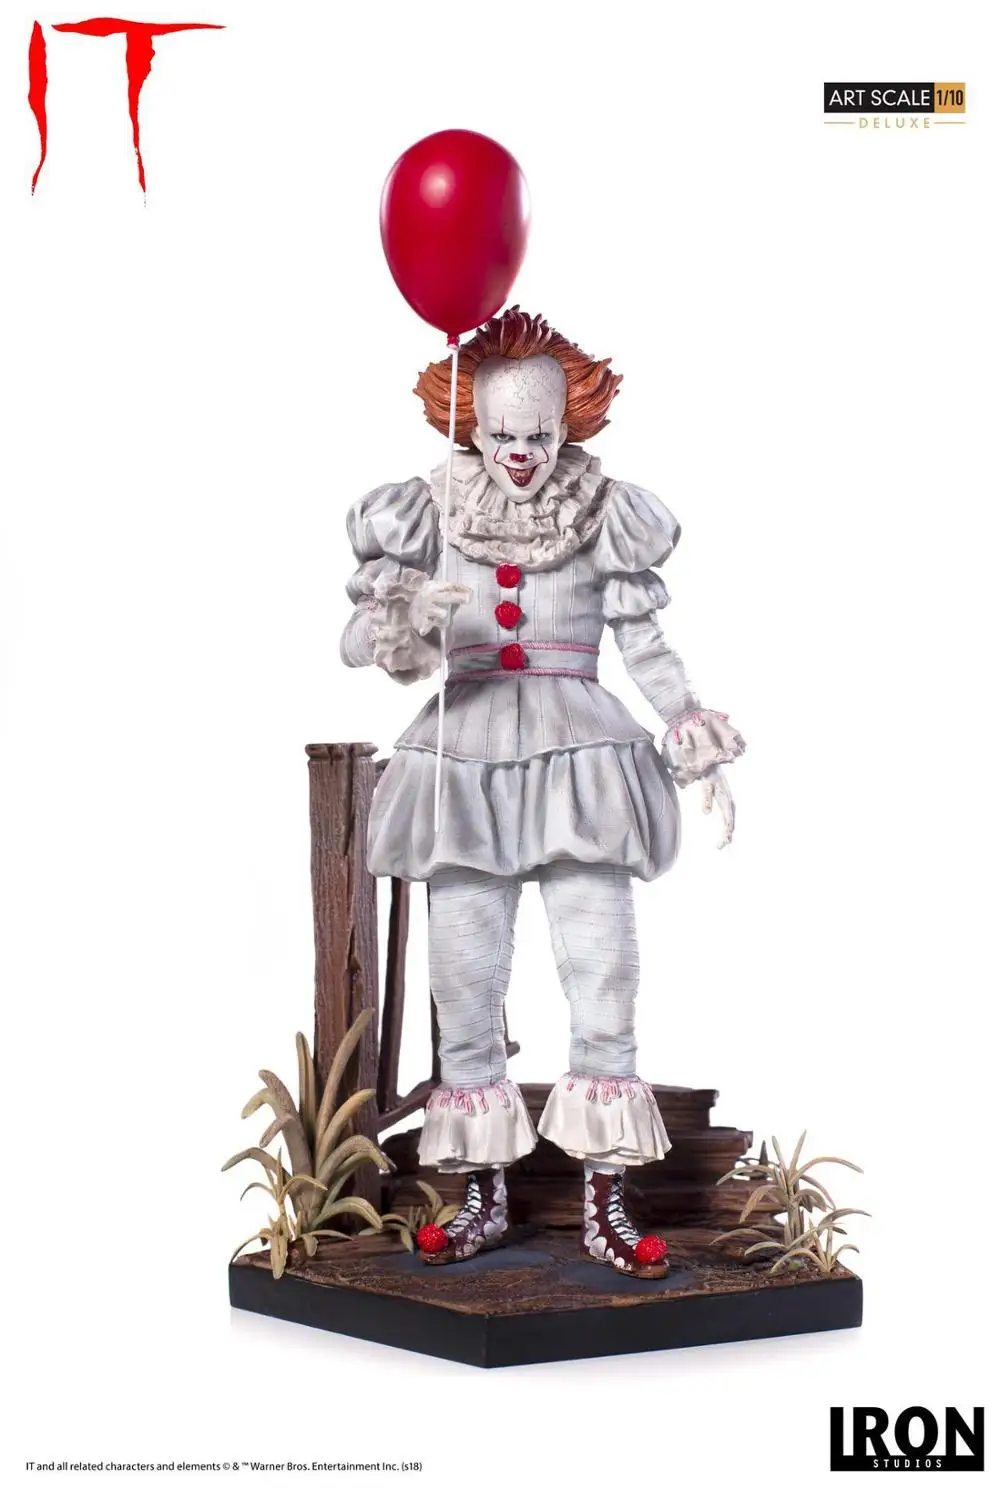 6 Type With LED Original NECA Stephen King's Iron It Pennywise Horror Action Figure Toy Doll Christmas Gift